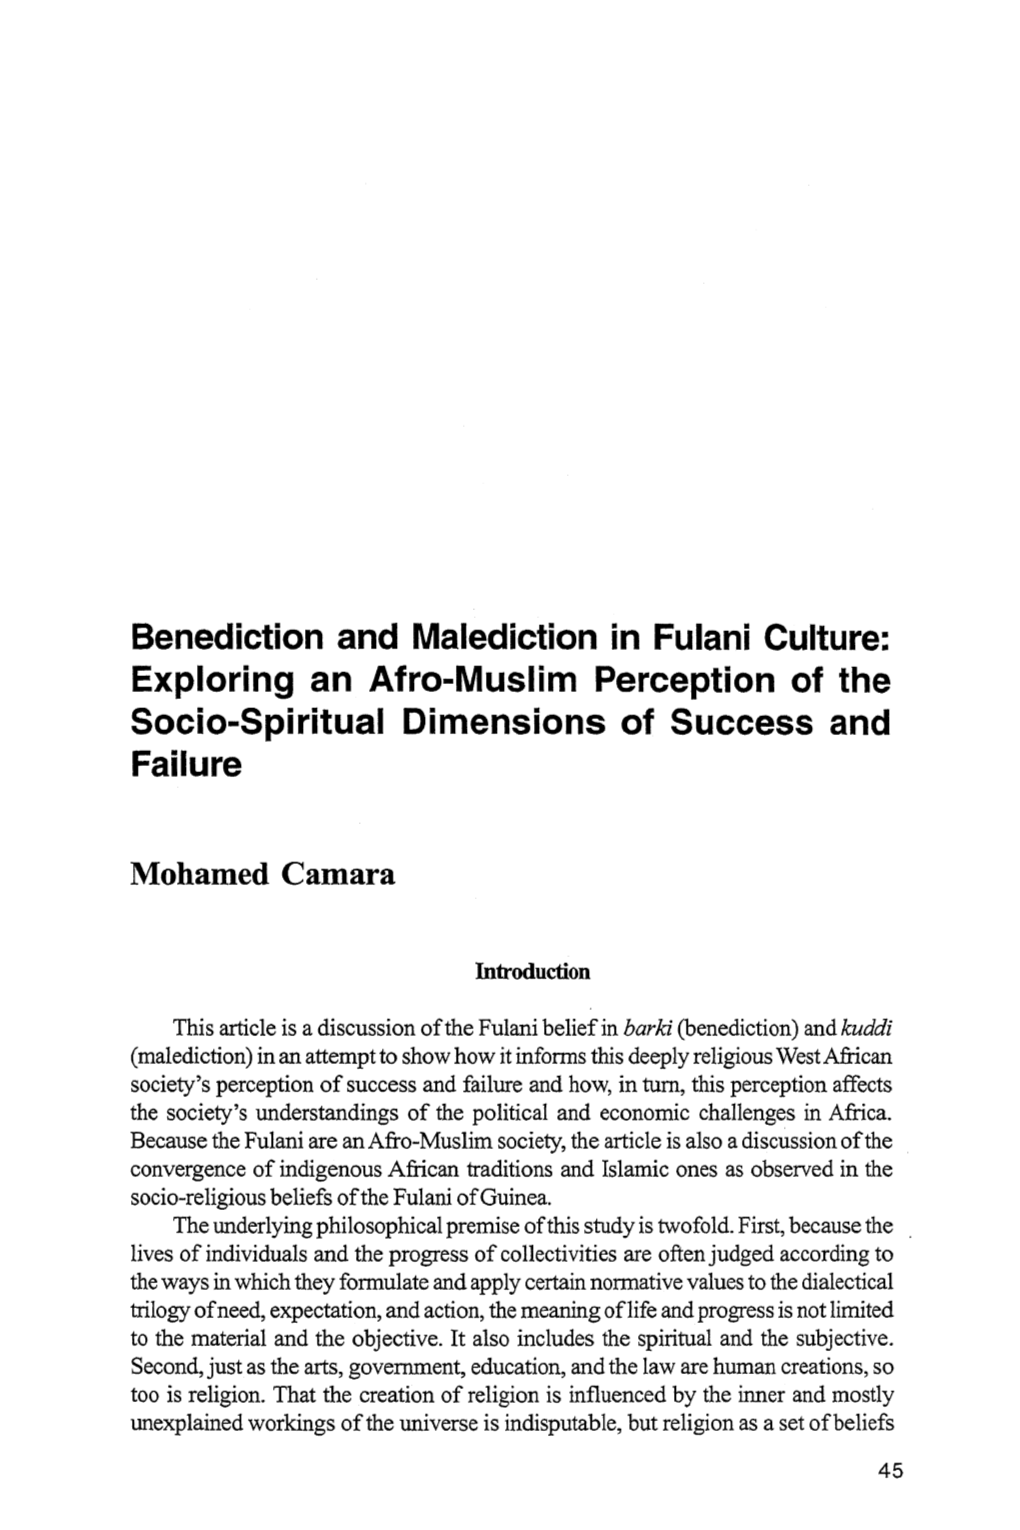 Benediction and Malediction in Fulani Culture: Exploring an Afro-Muslim Perception of the Socio-Spiritual Dimensions of Success and Failure